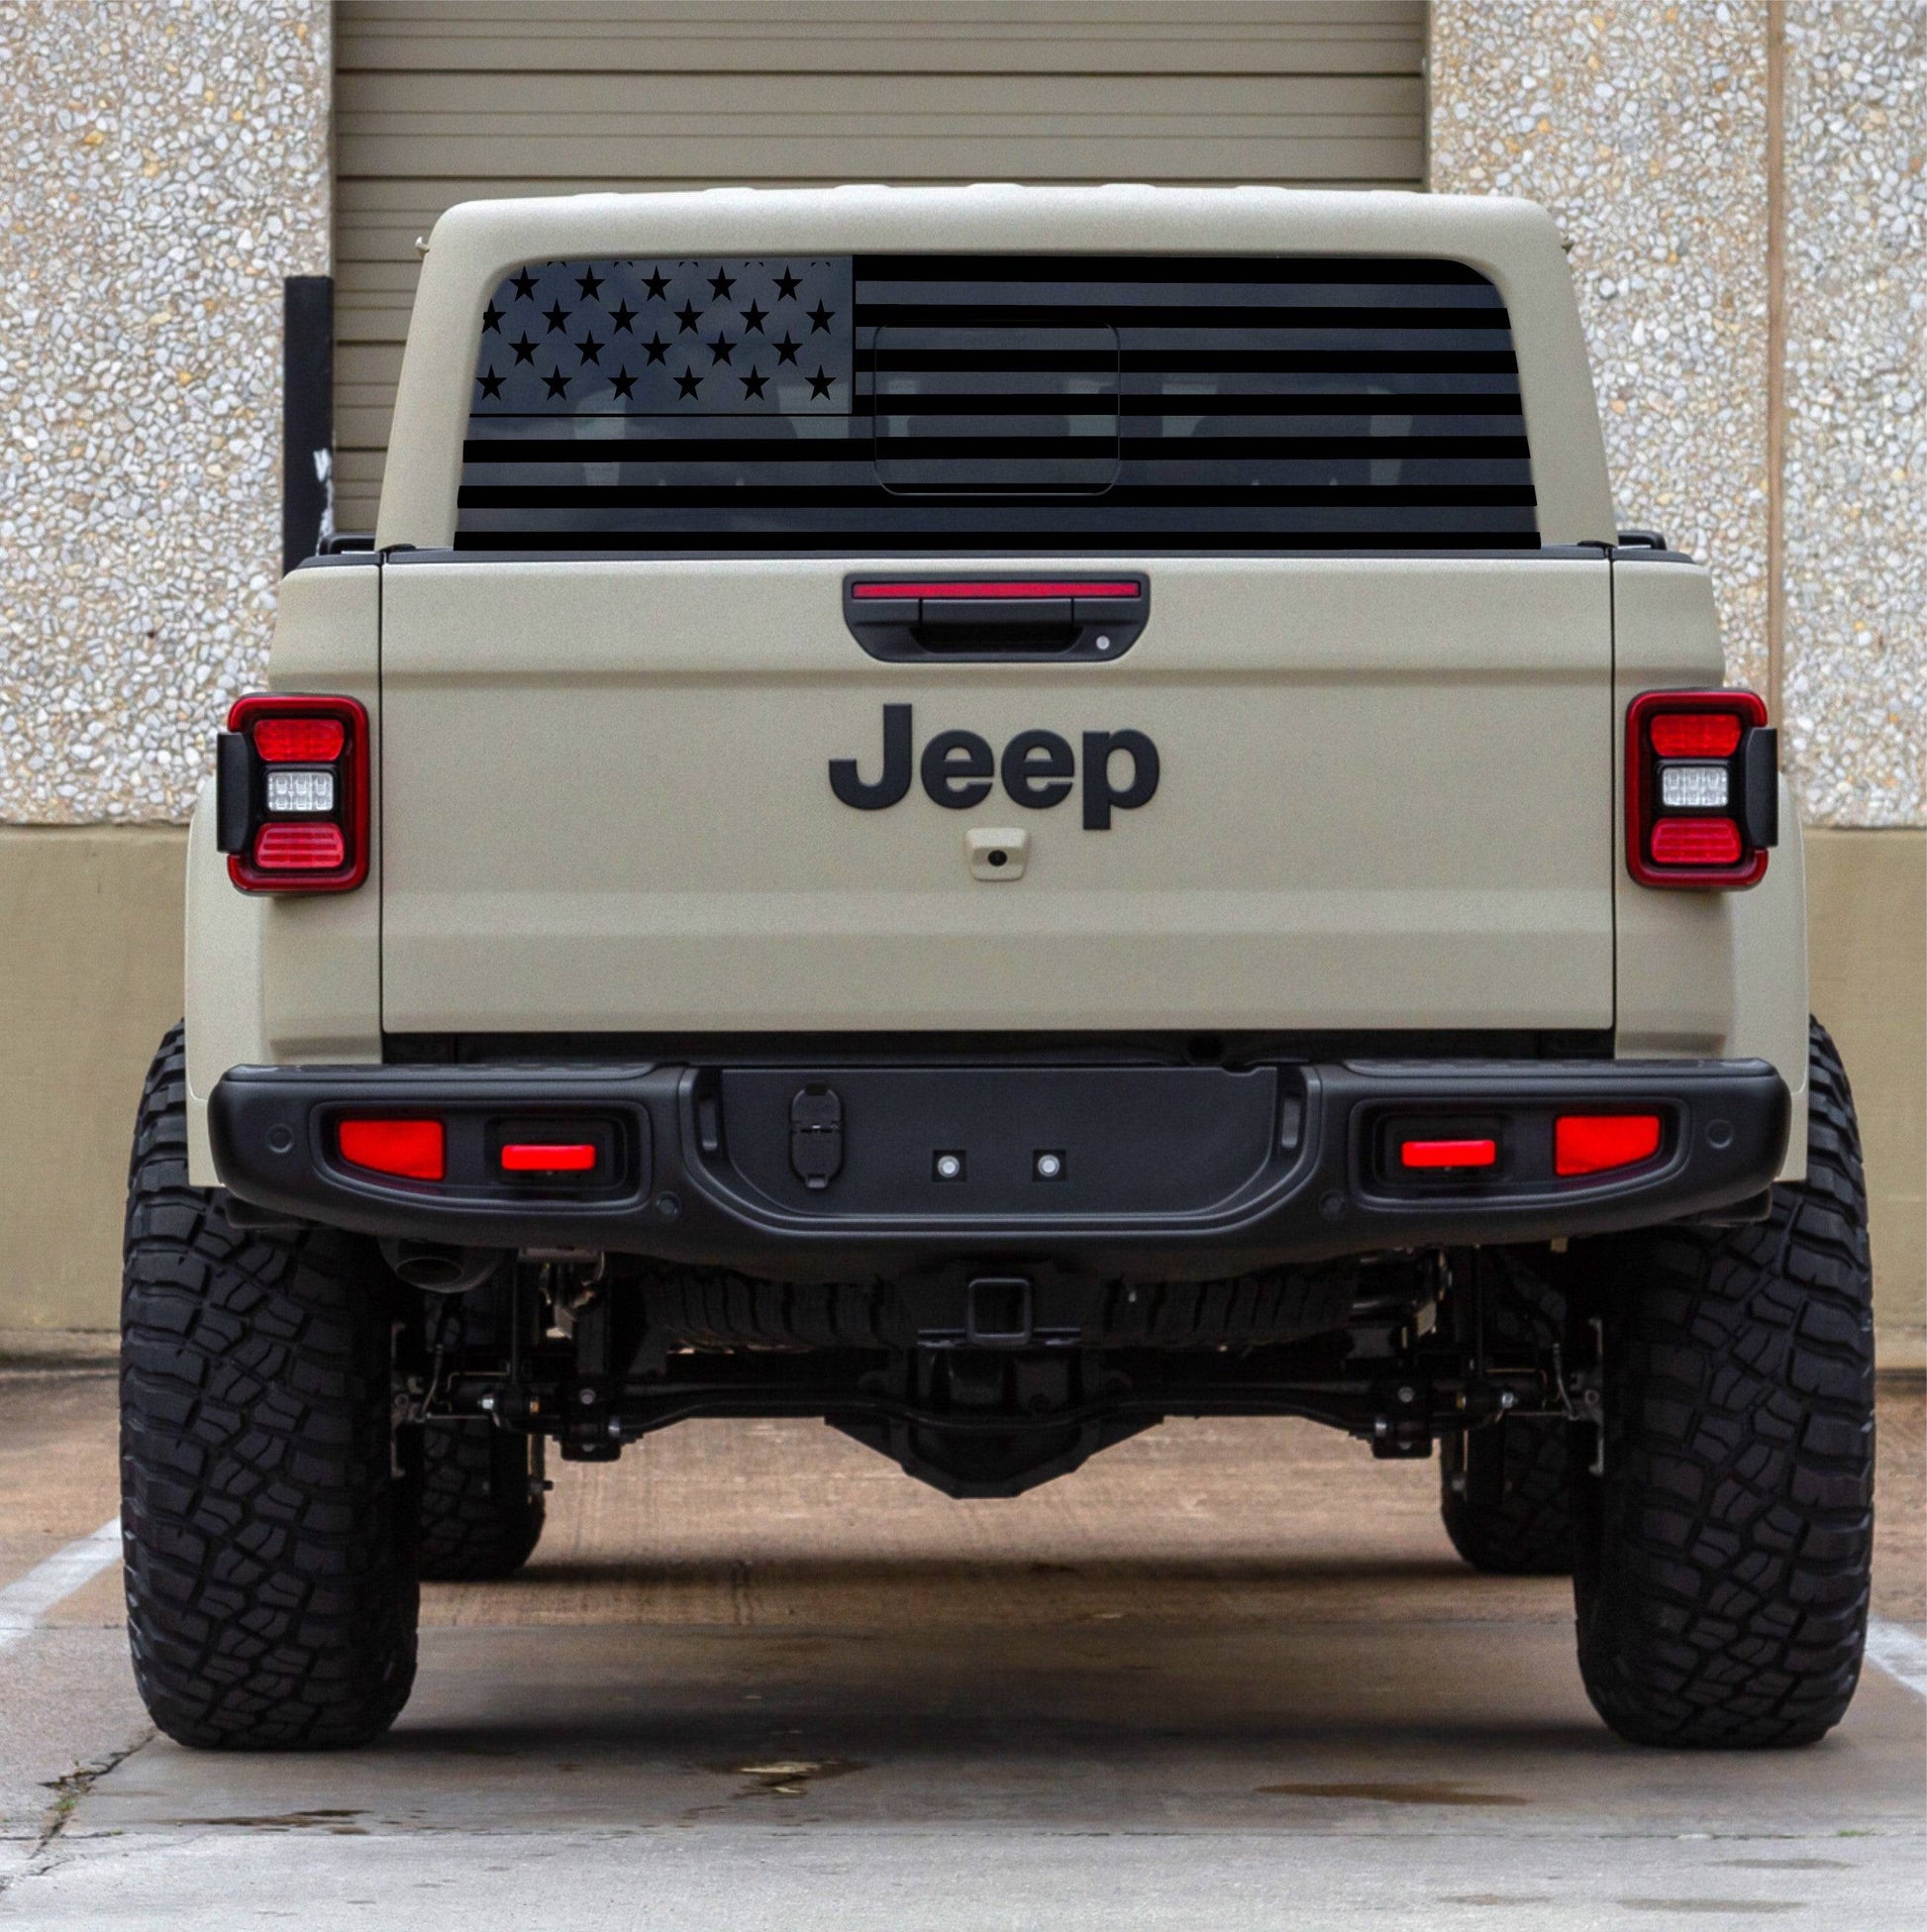 American Flag Vinyl Decal for Jeep Gladiator's Whole Back Rear Window